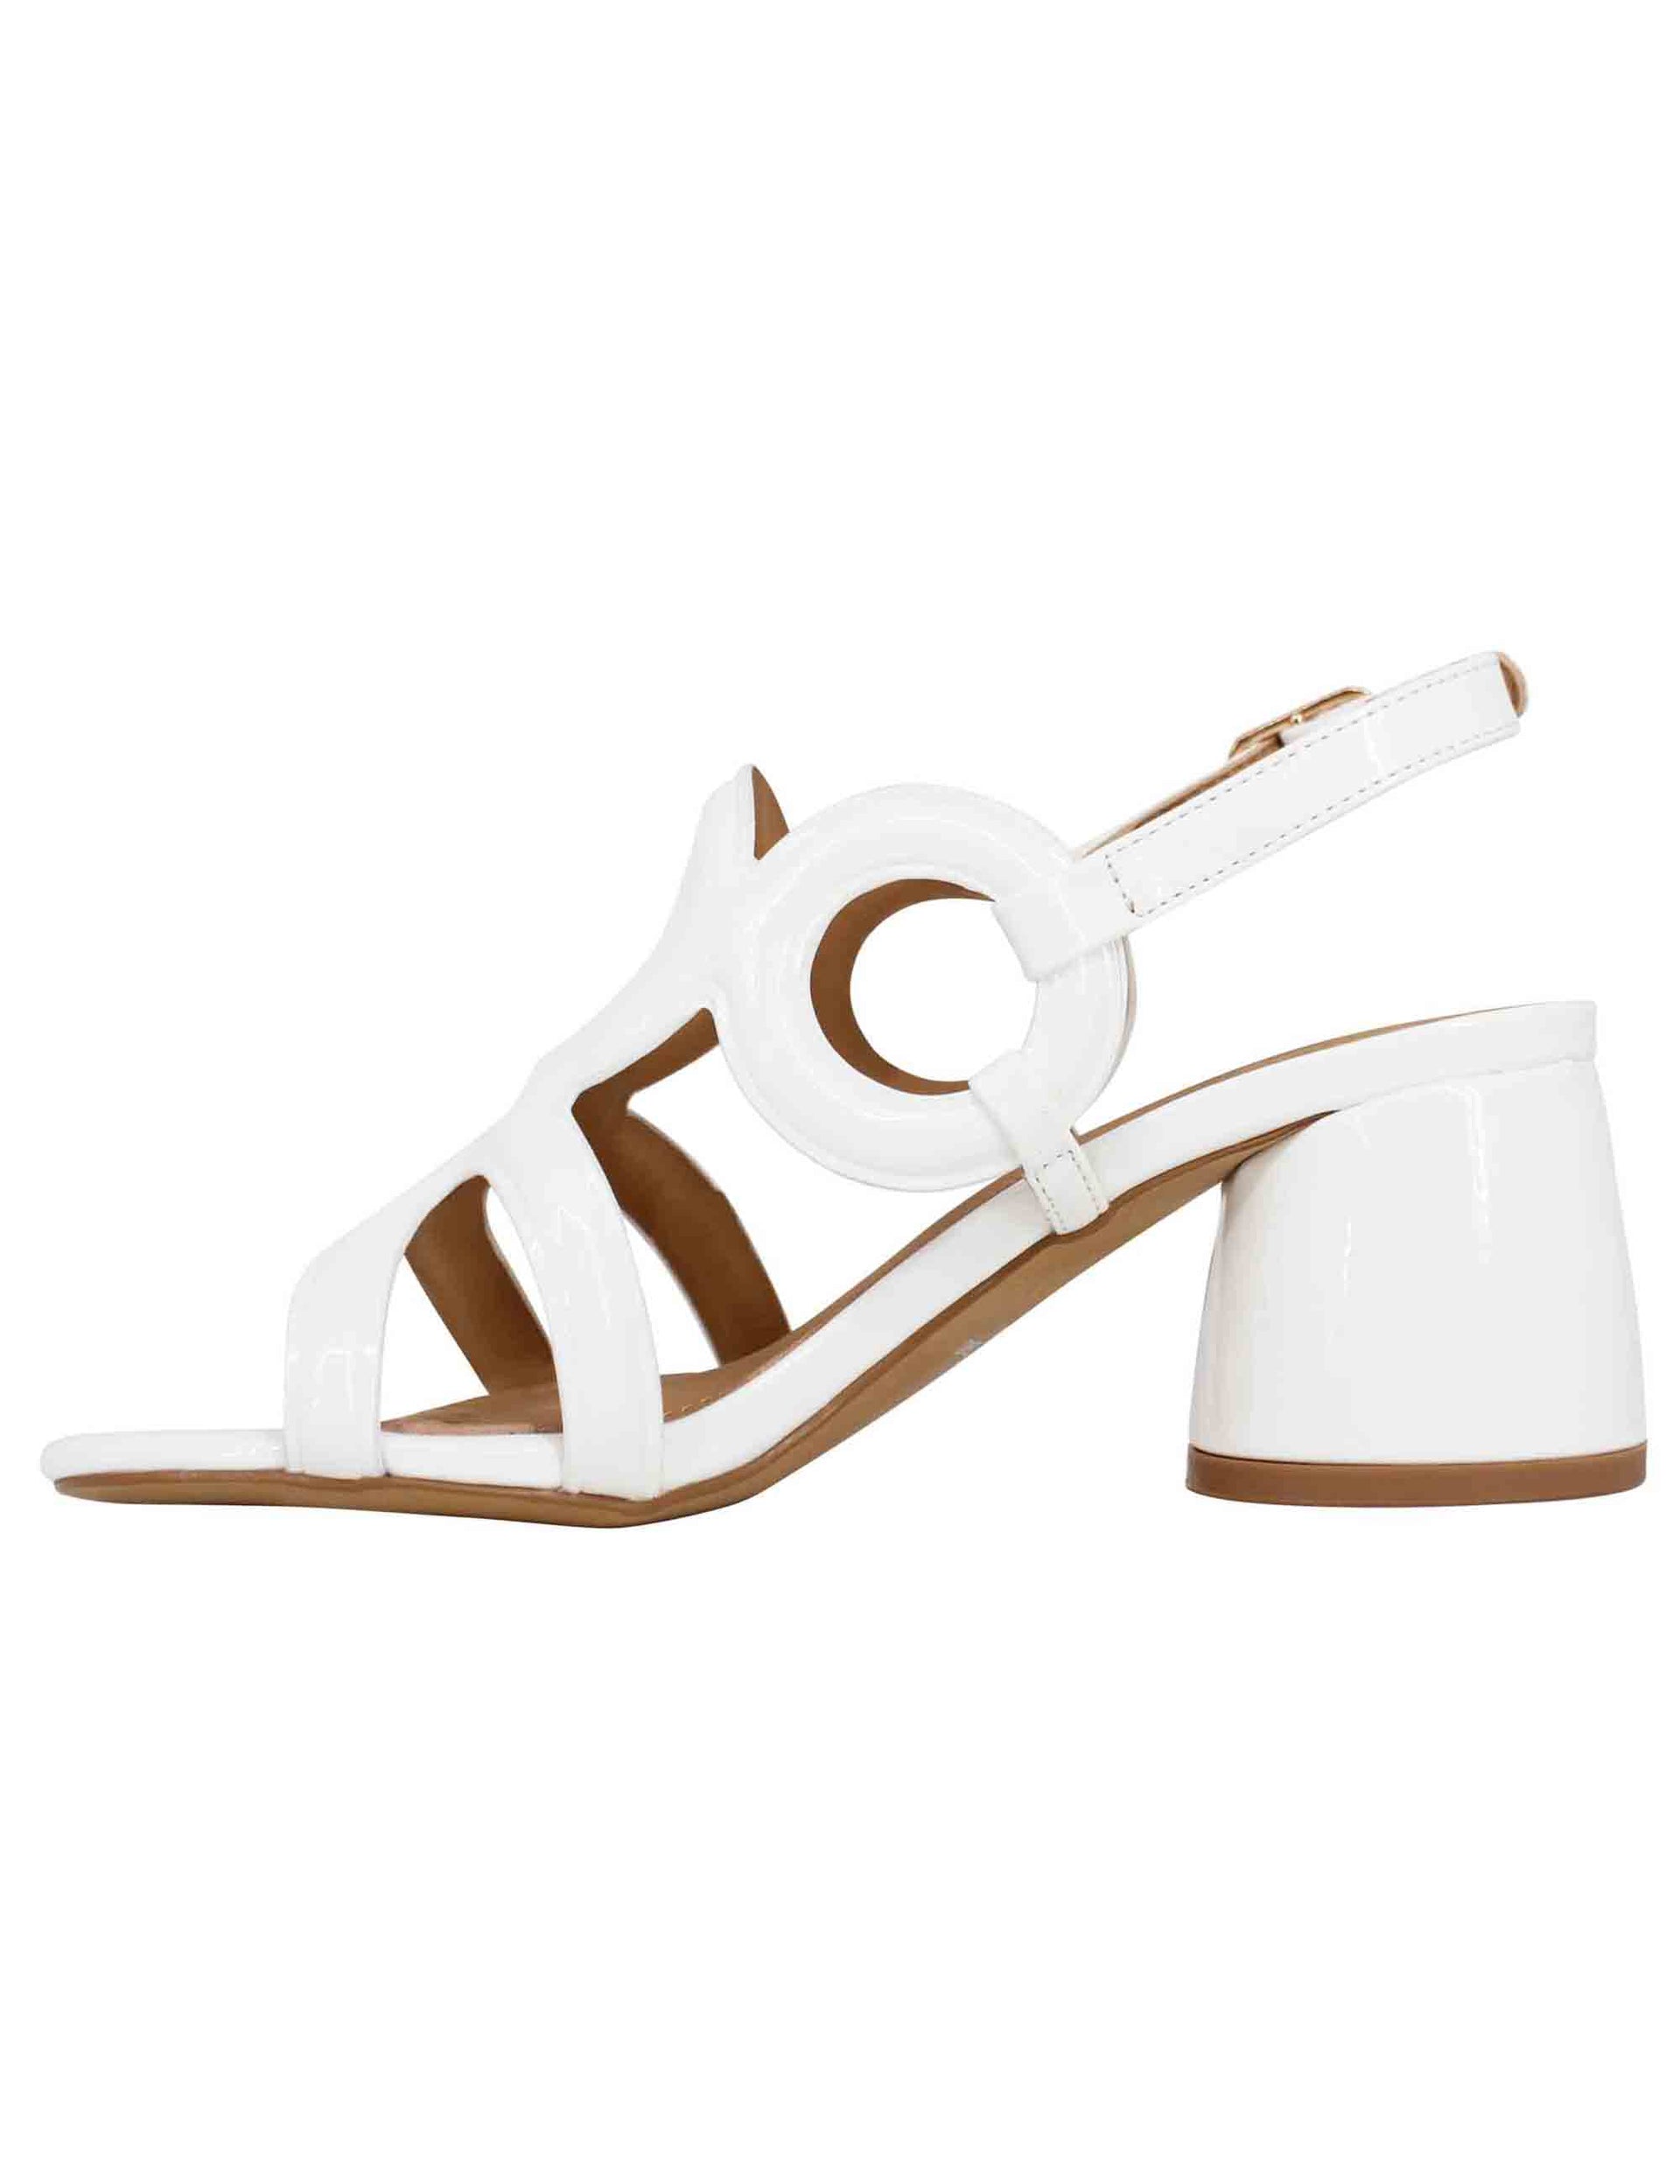 Women's slingback sandals in white shiny leather with round toe